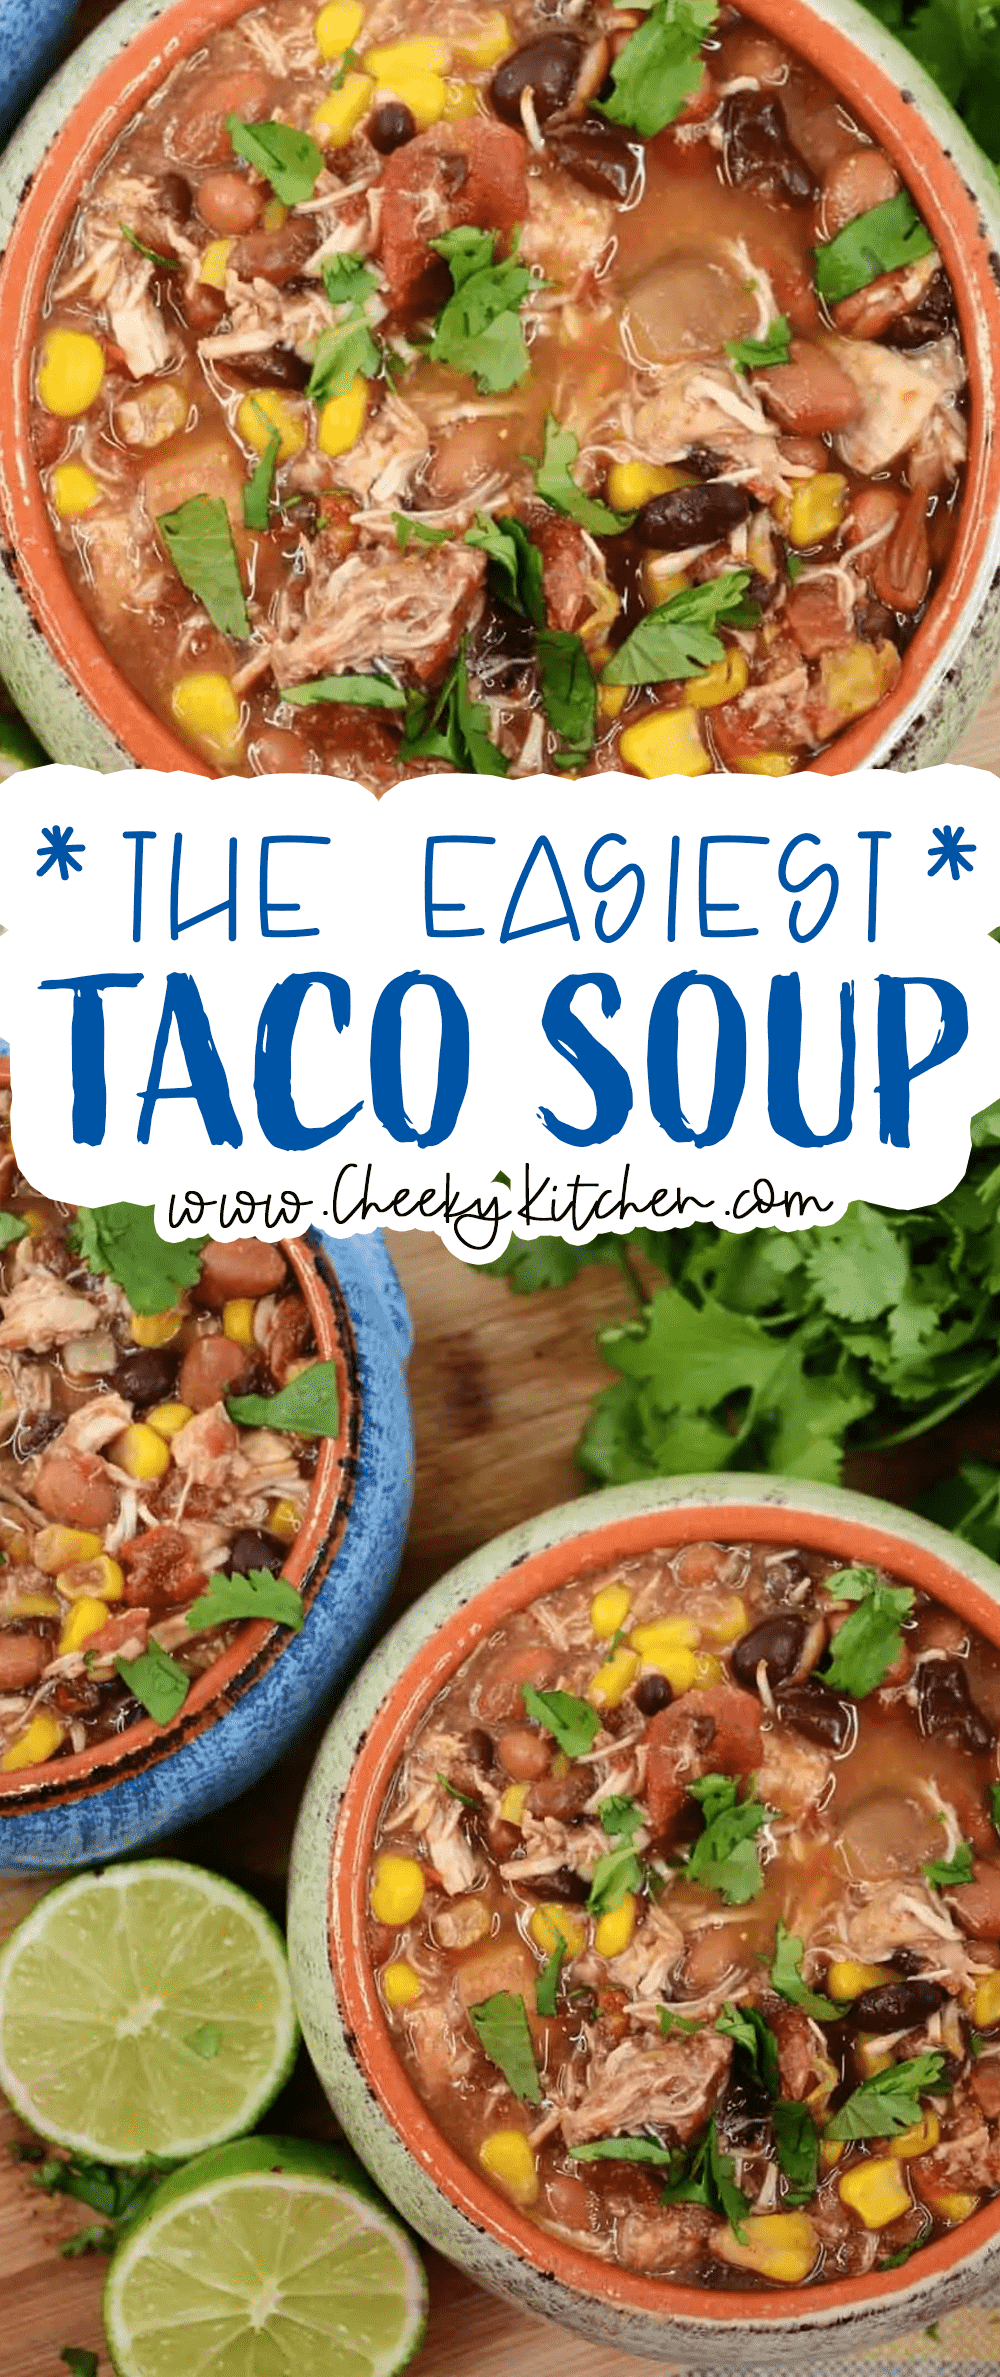 The Easiest Taco Soup Ever!